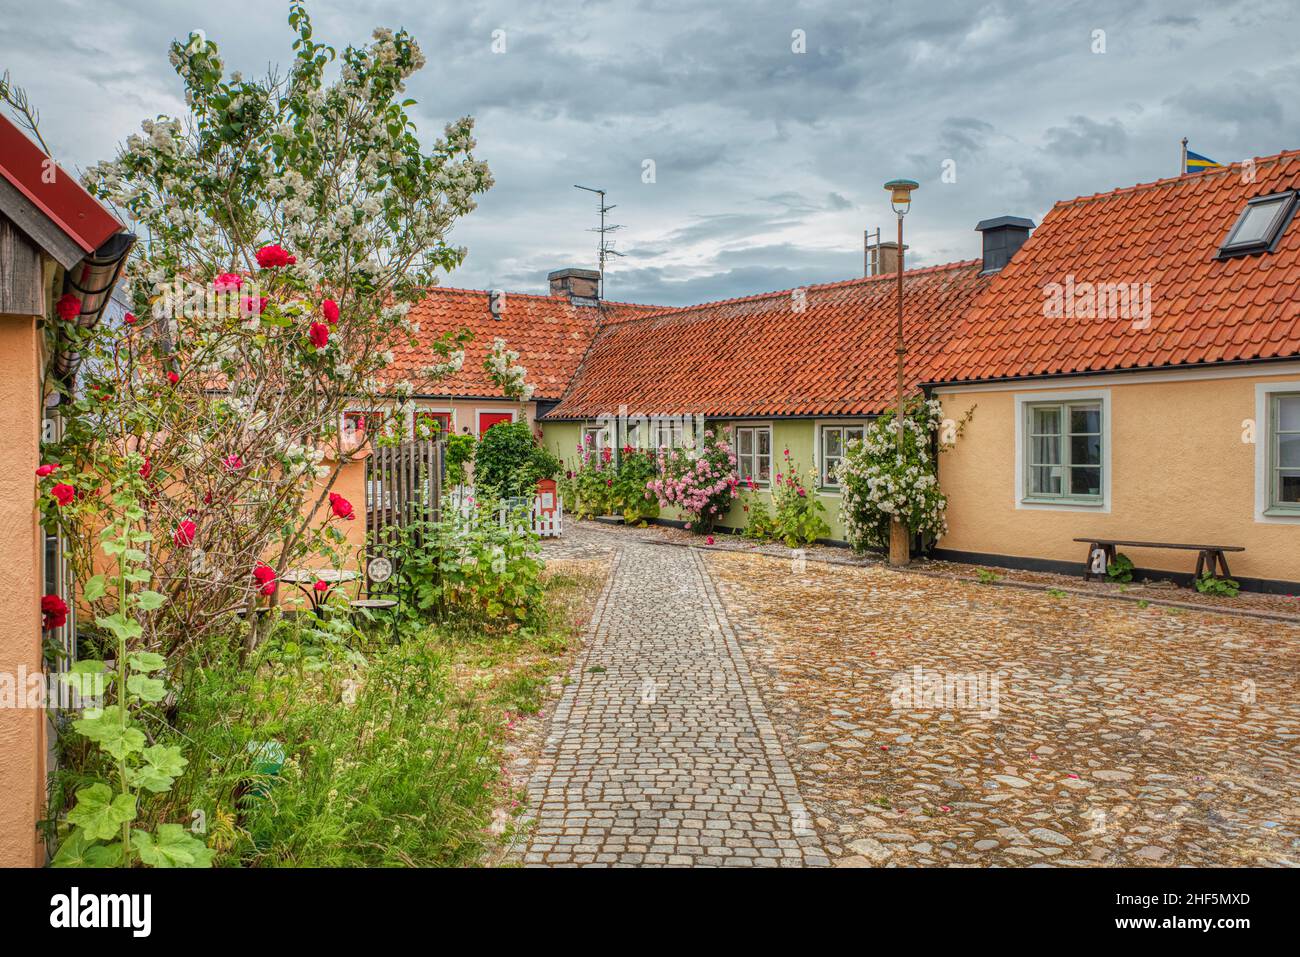 Cobbled town square in a small, touristic fishermen village in the Osterlen region shows a cosy neighbourhood and conveys a sense of community. Sweden Stock Photo